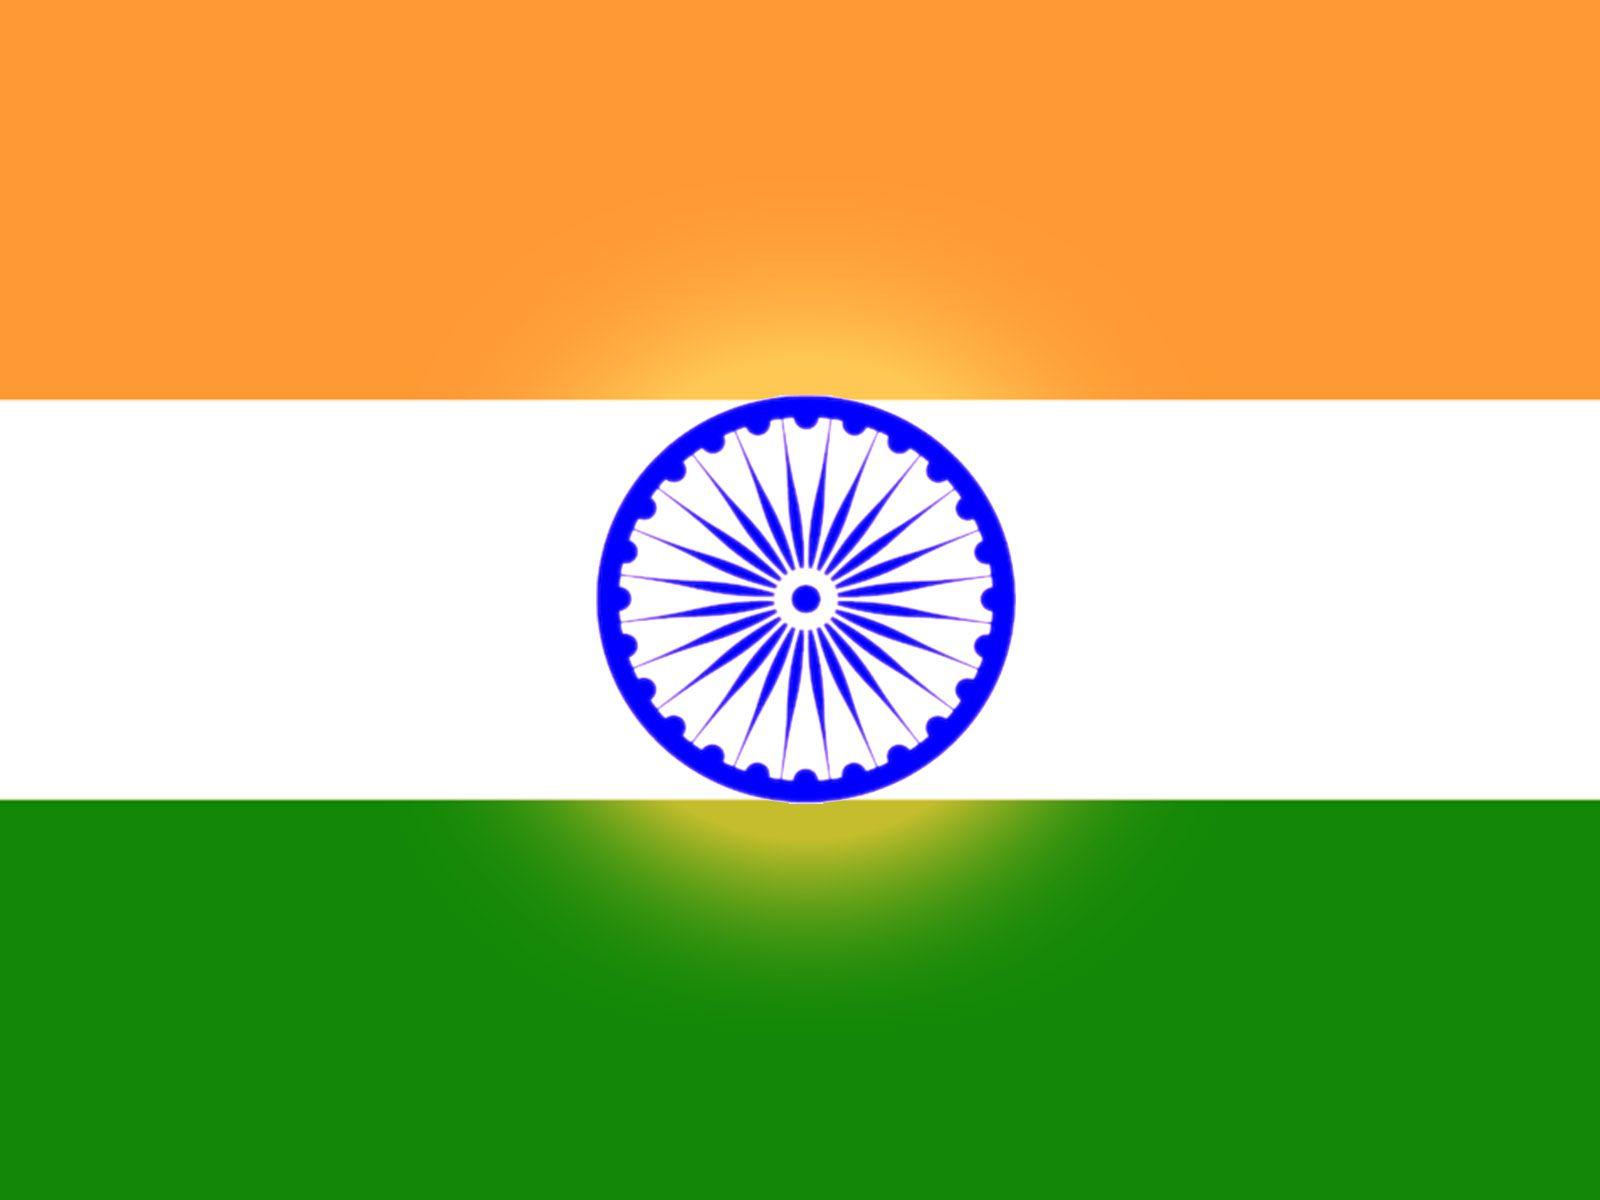 Happy Republic Day India Flag Image Picture Wallpaper Whatsapp